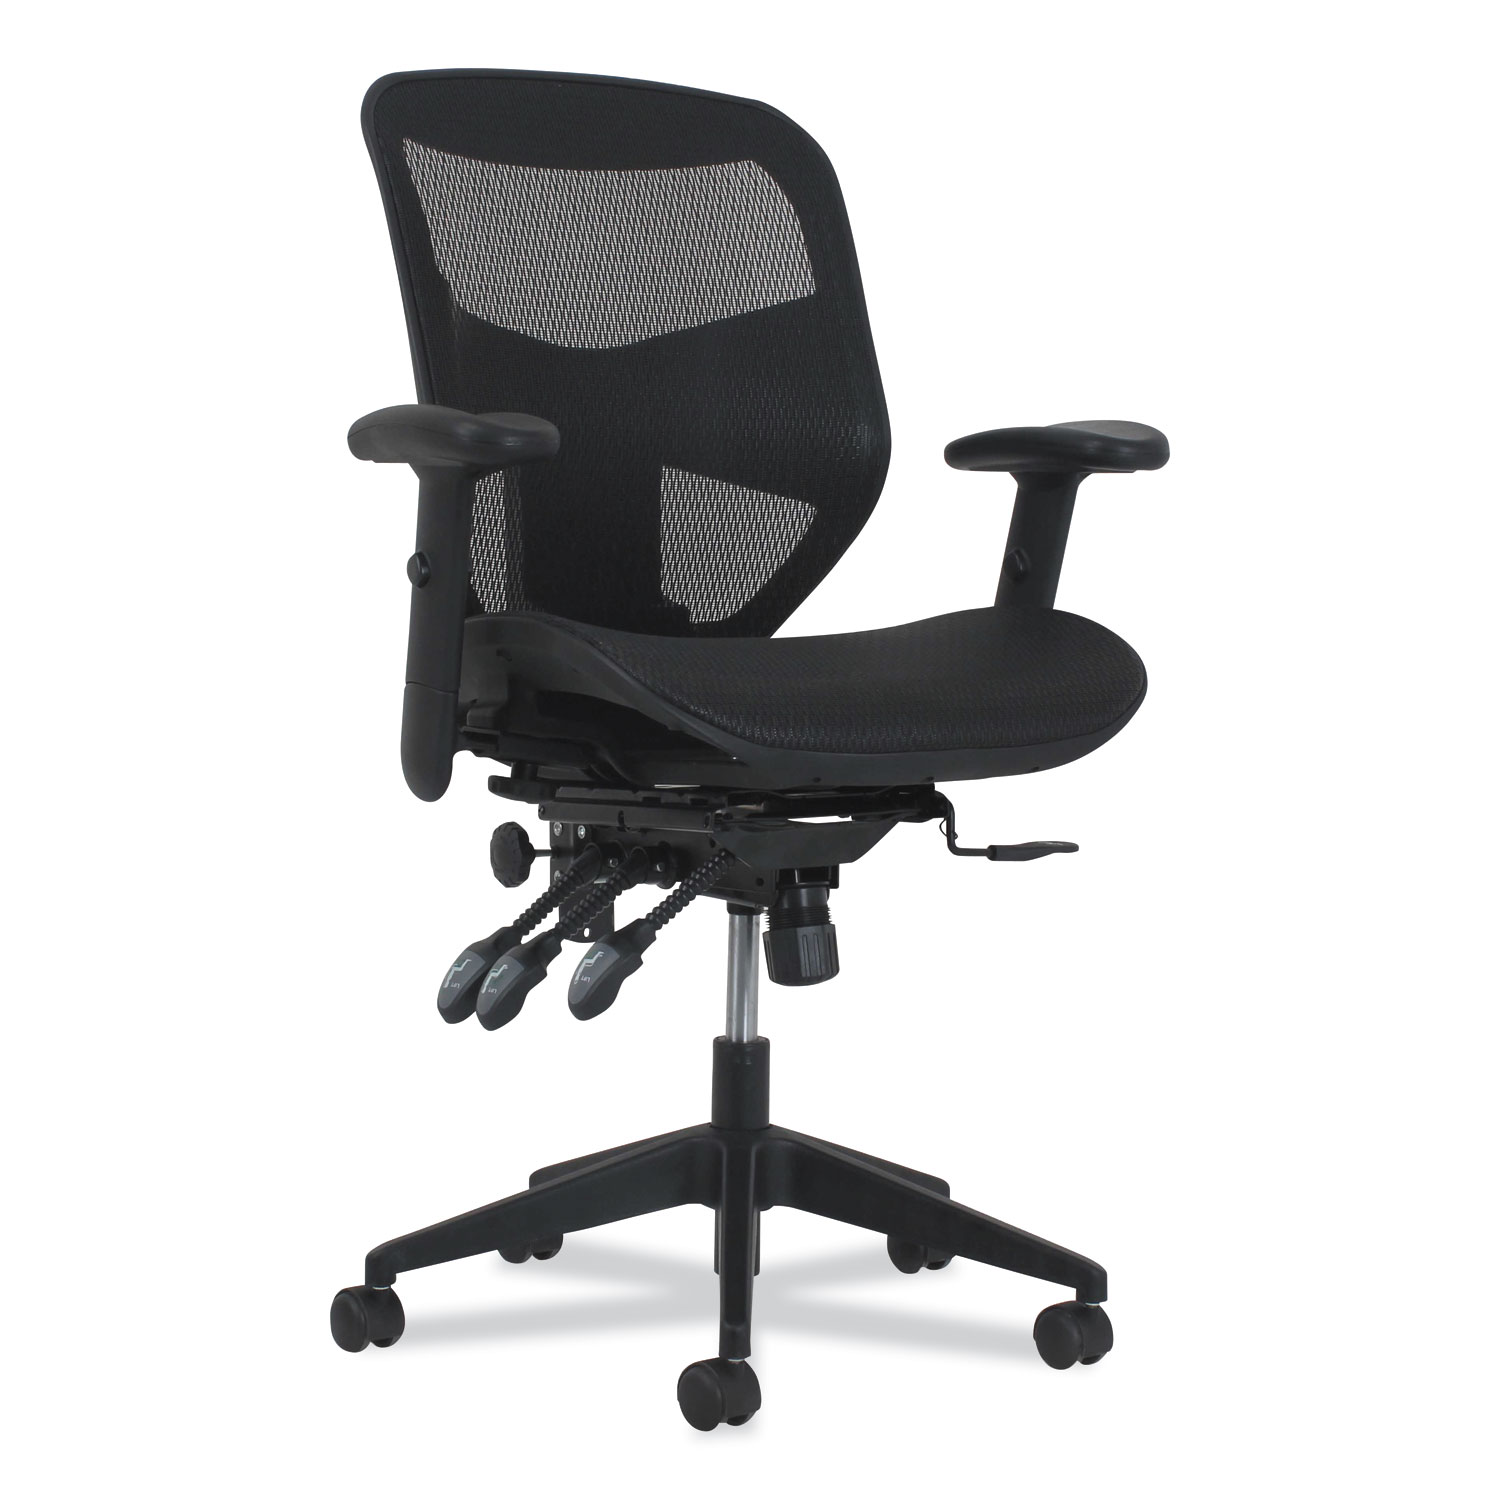 Prominent Mesh High-Back Task Chair, Mesh, Supports up to 250 lbs., Black Seat/Back and Base